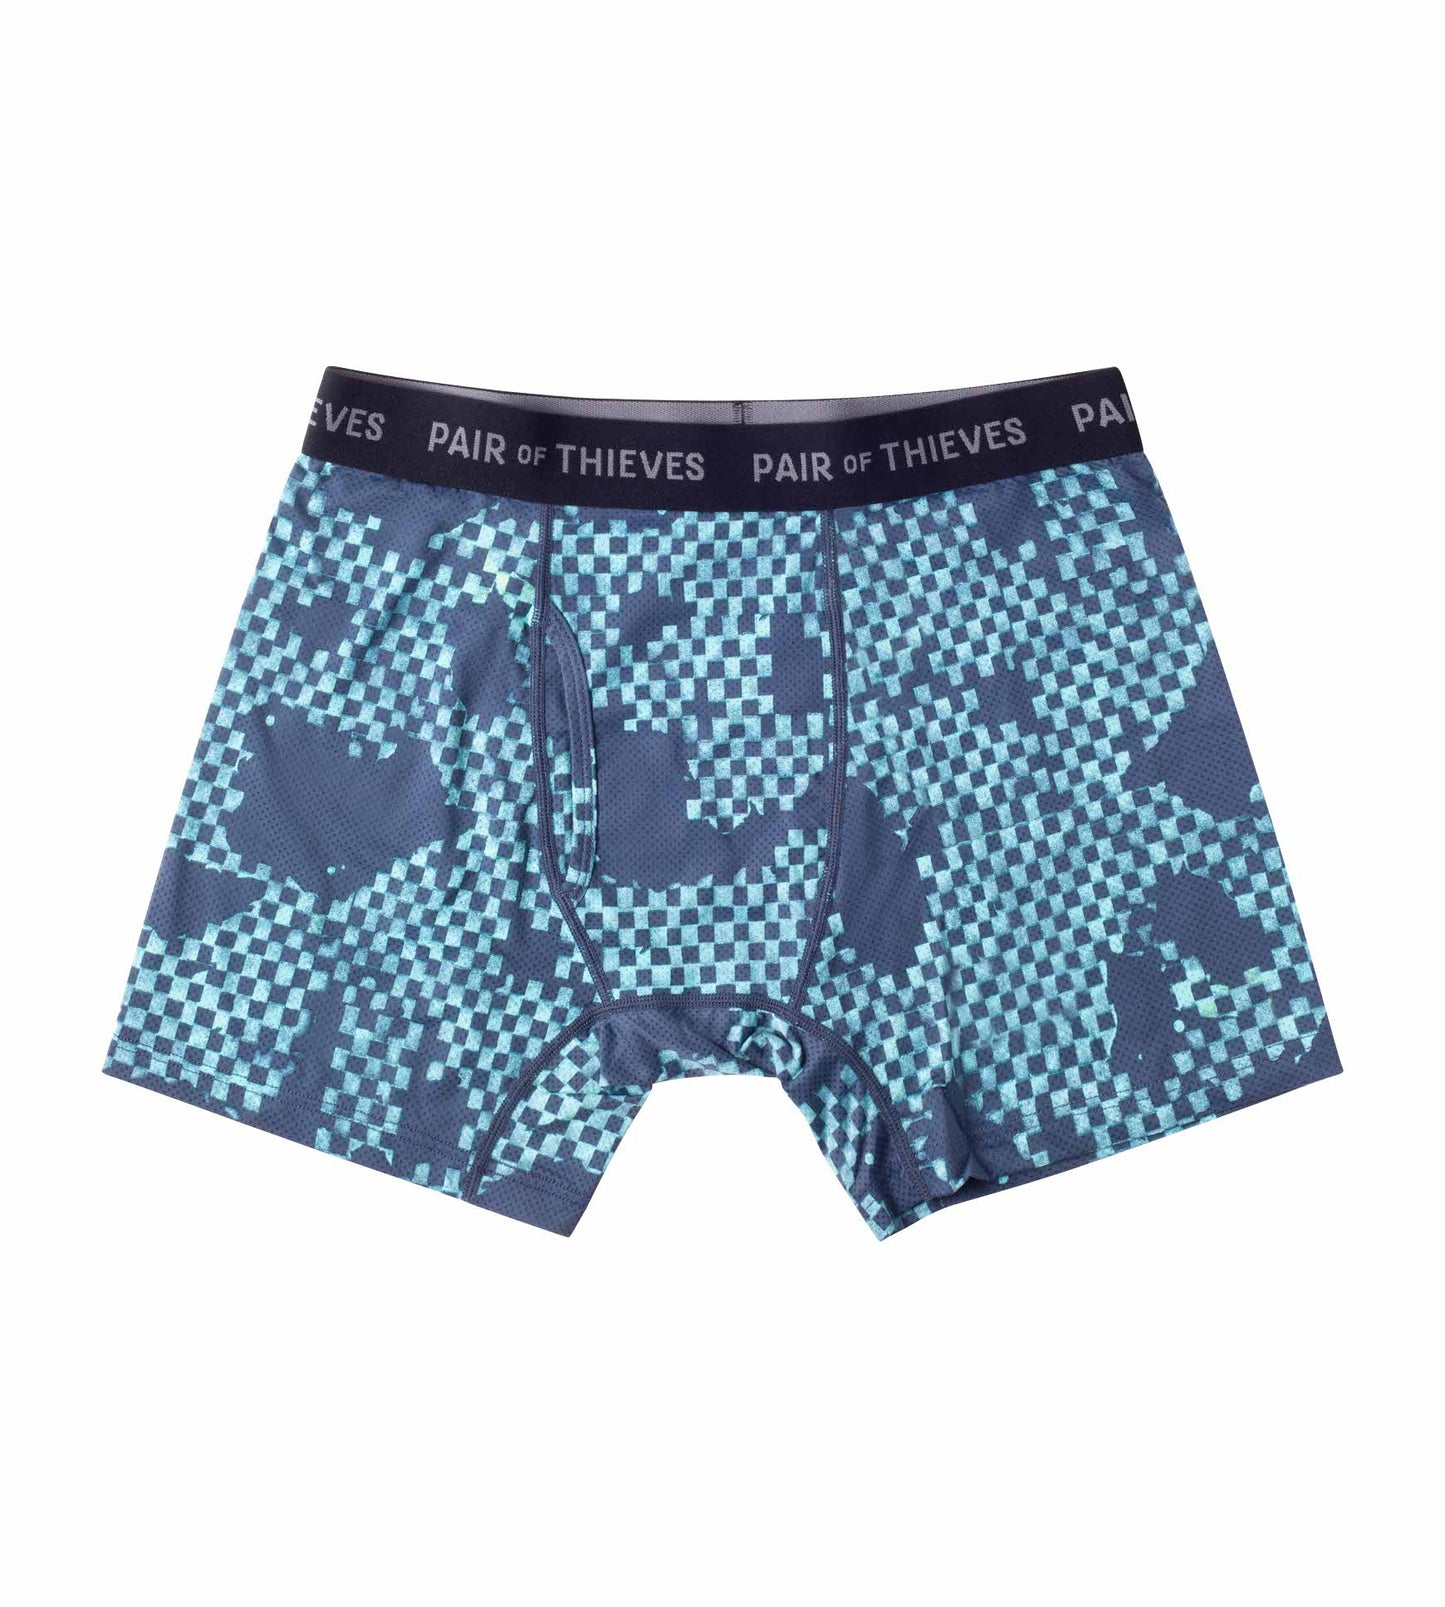 PAIR OF THIEVES Superfit Mens 2 Pack Boxer Briefs - Gray/Multi